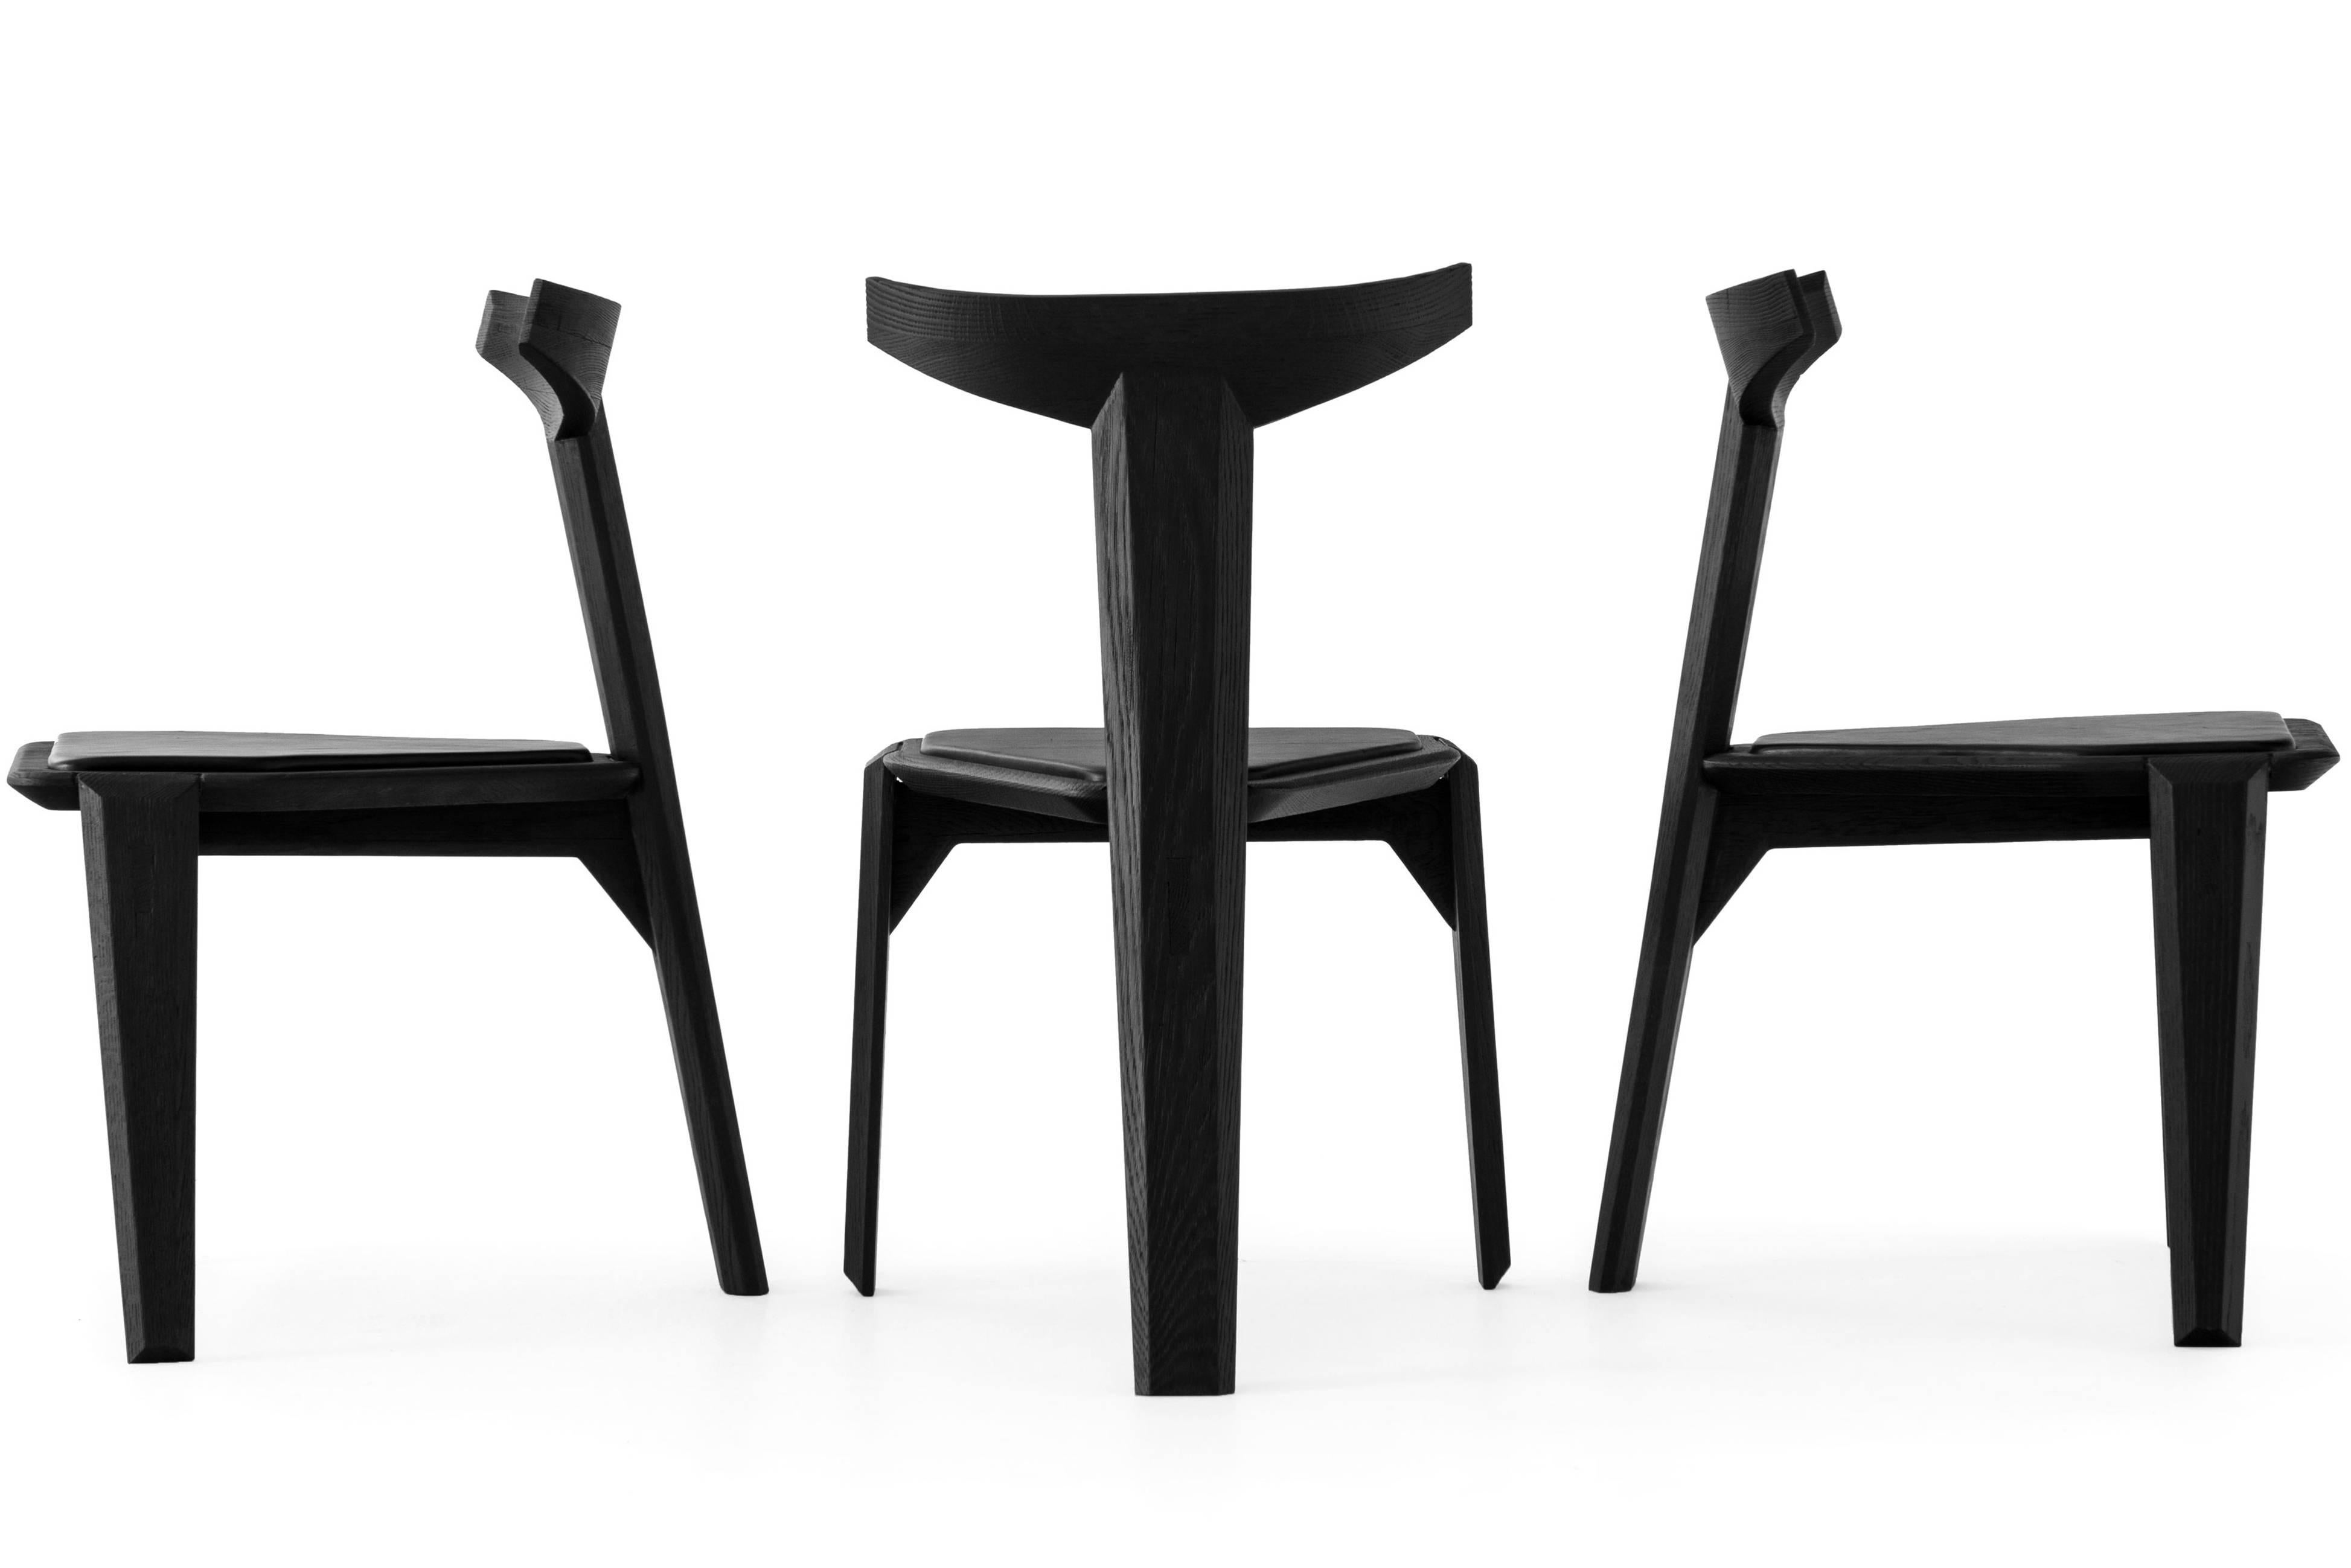 Hand-Crafted Ceniza Chair in Oak, Hand Carved, Alquimia Collection by Ewe Studio For Sale